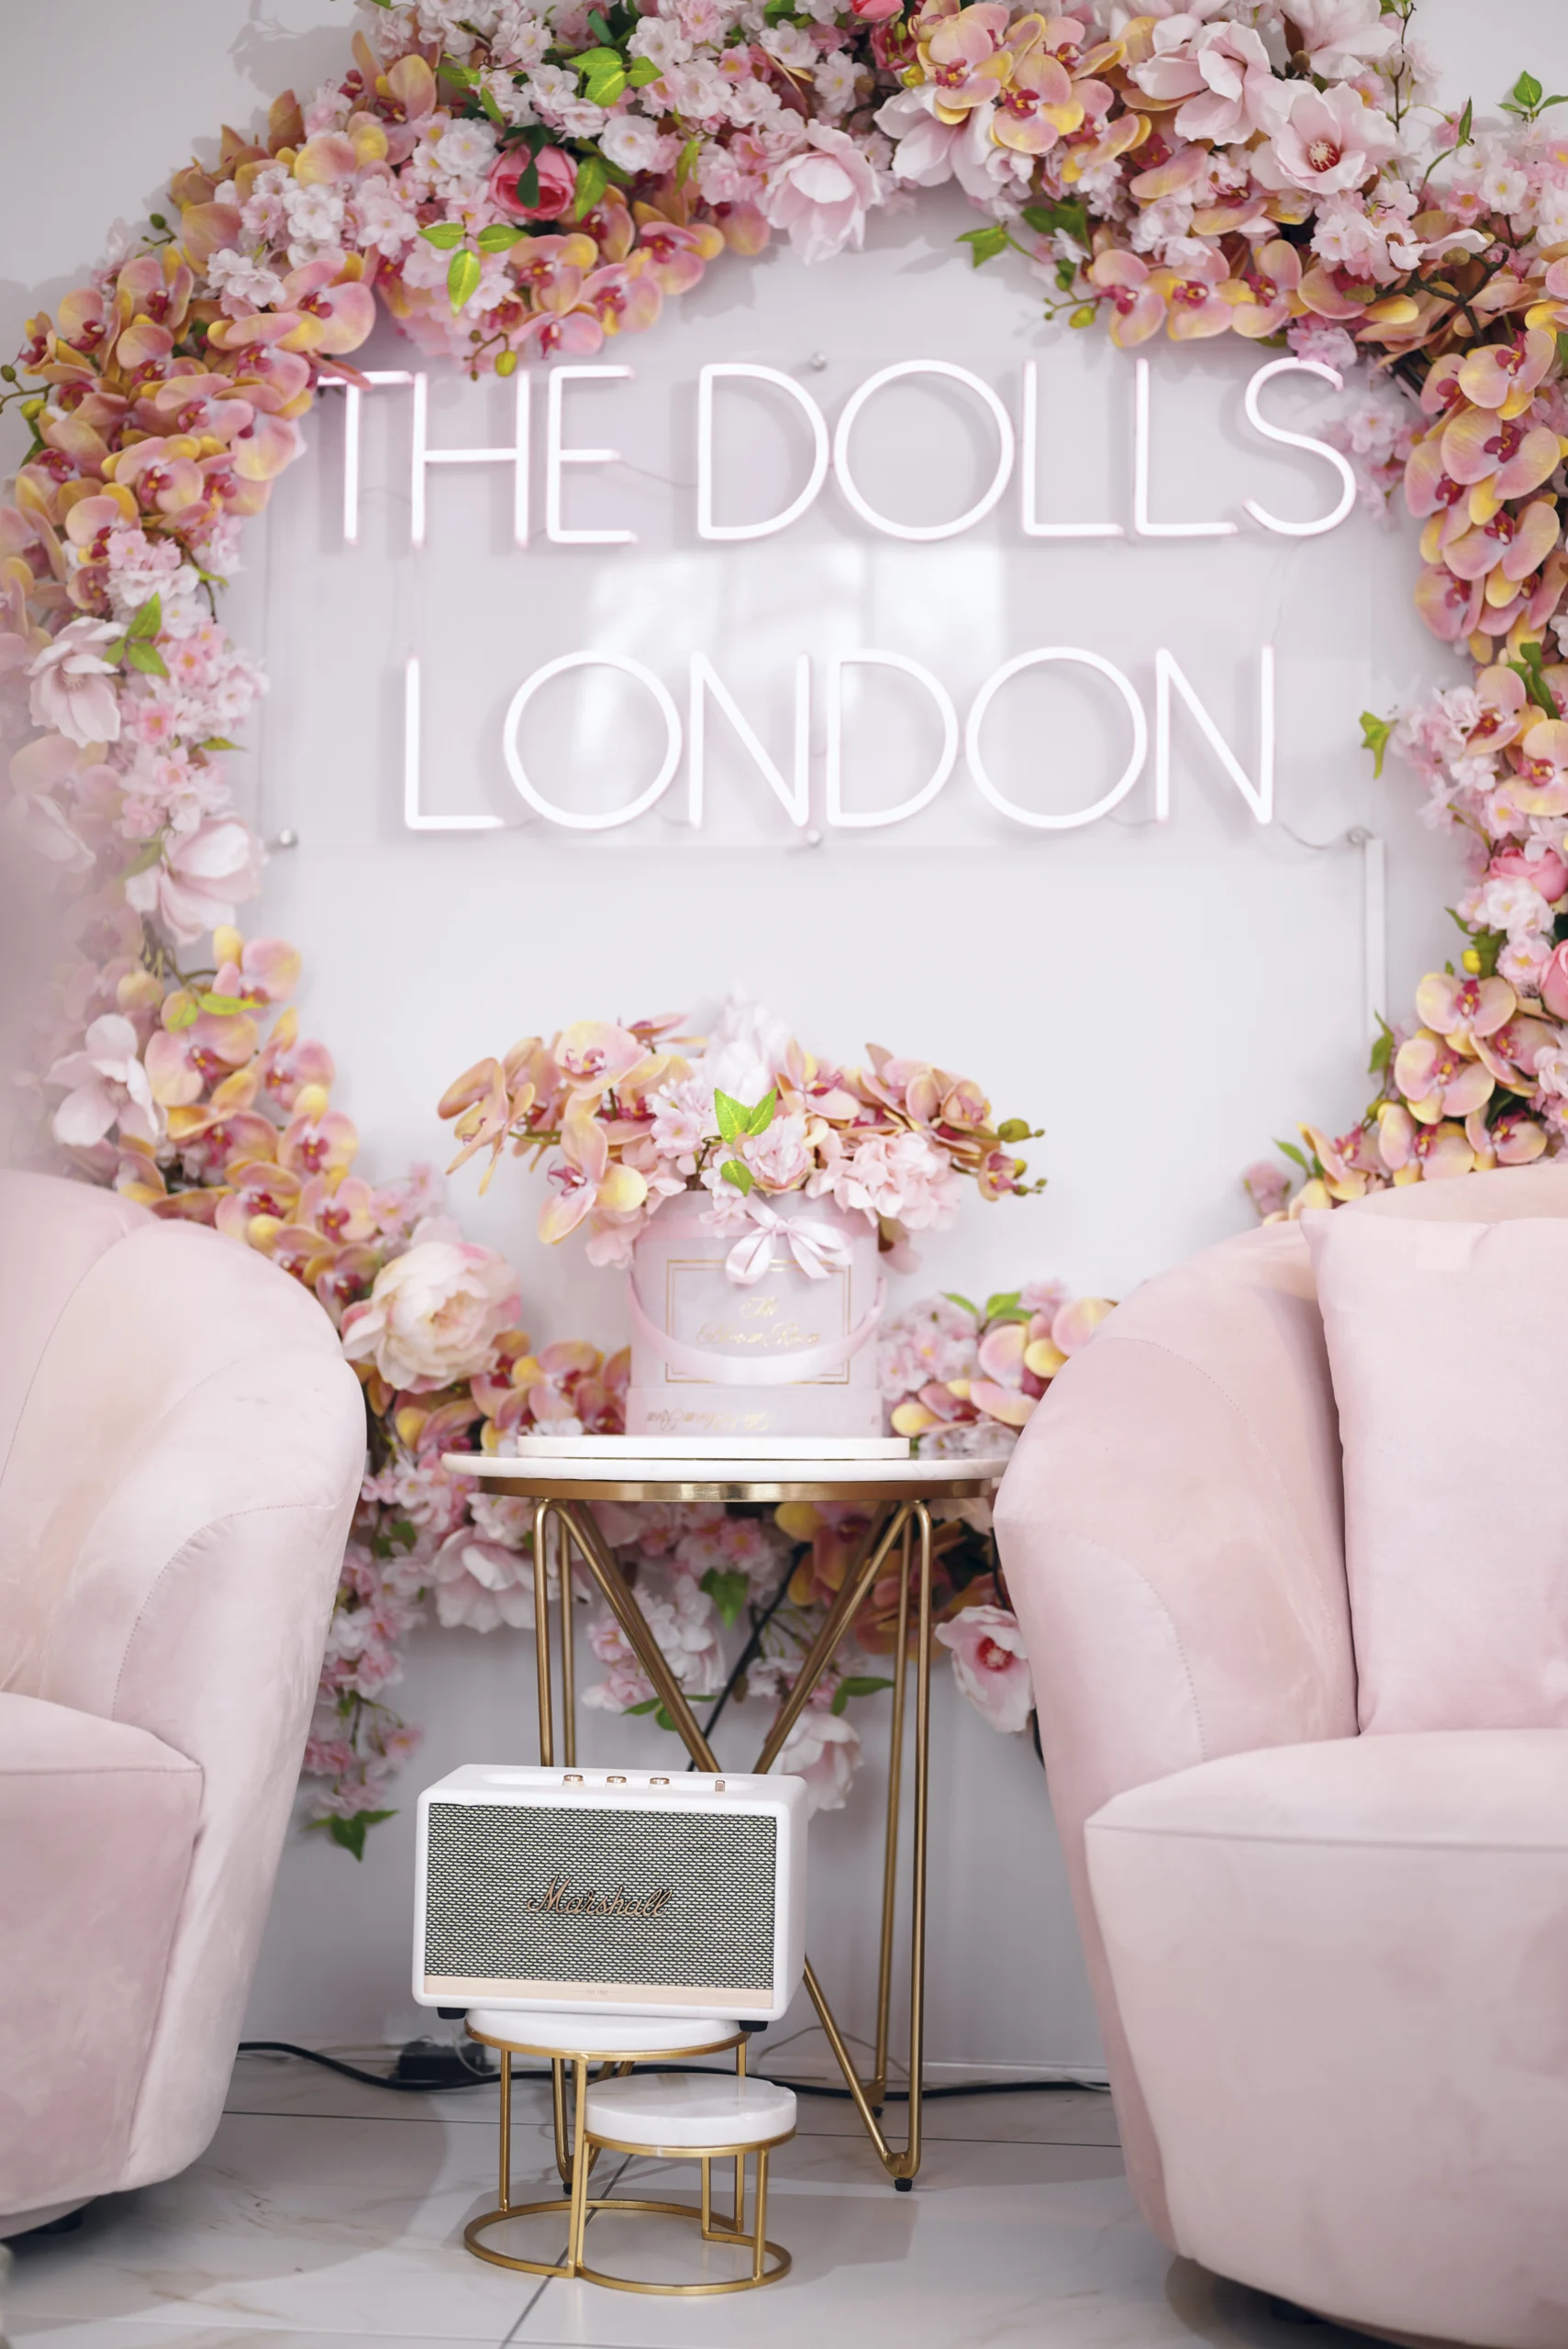 About The Dolls London